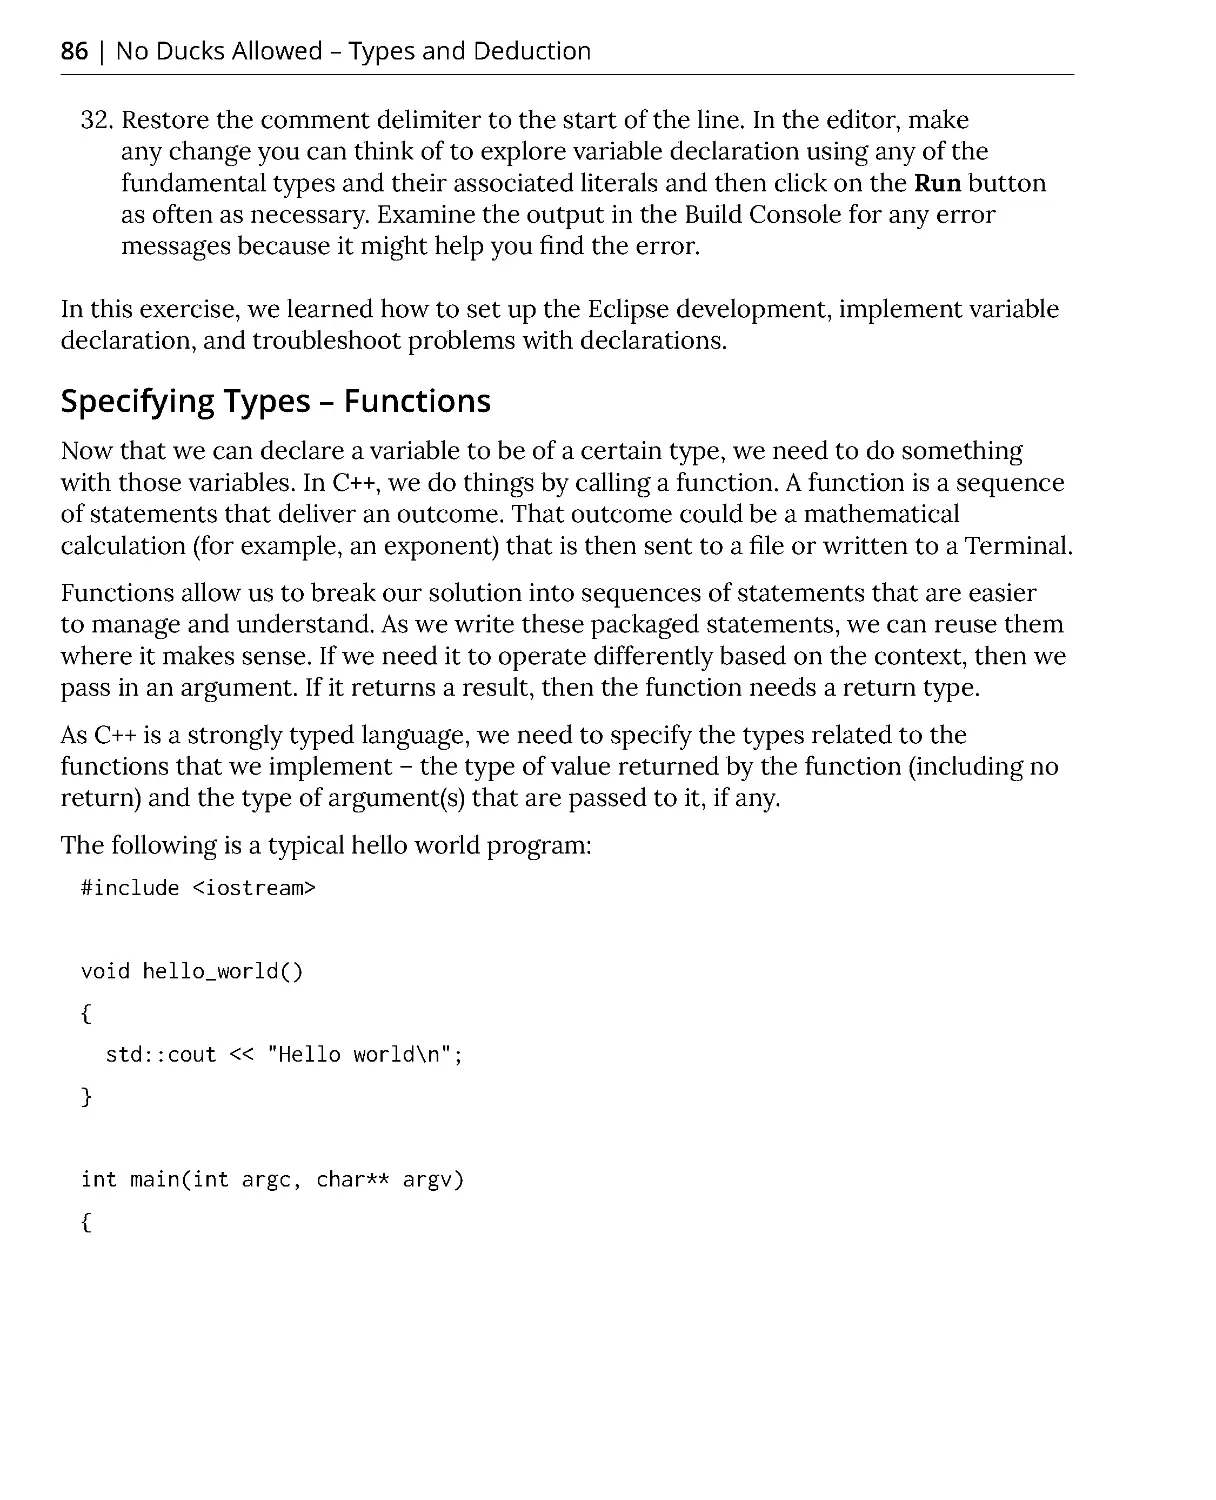 Specifying Types – Functions